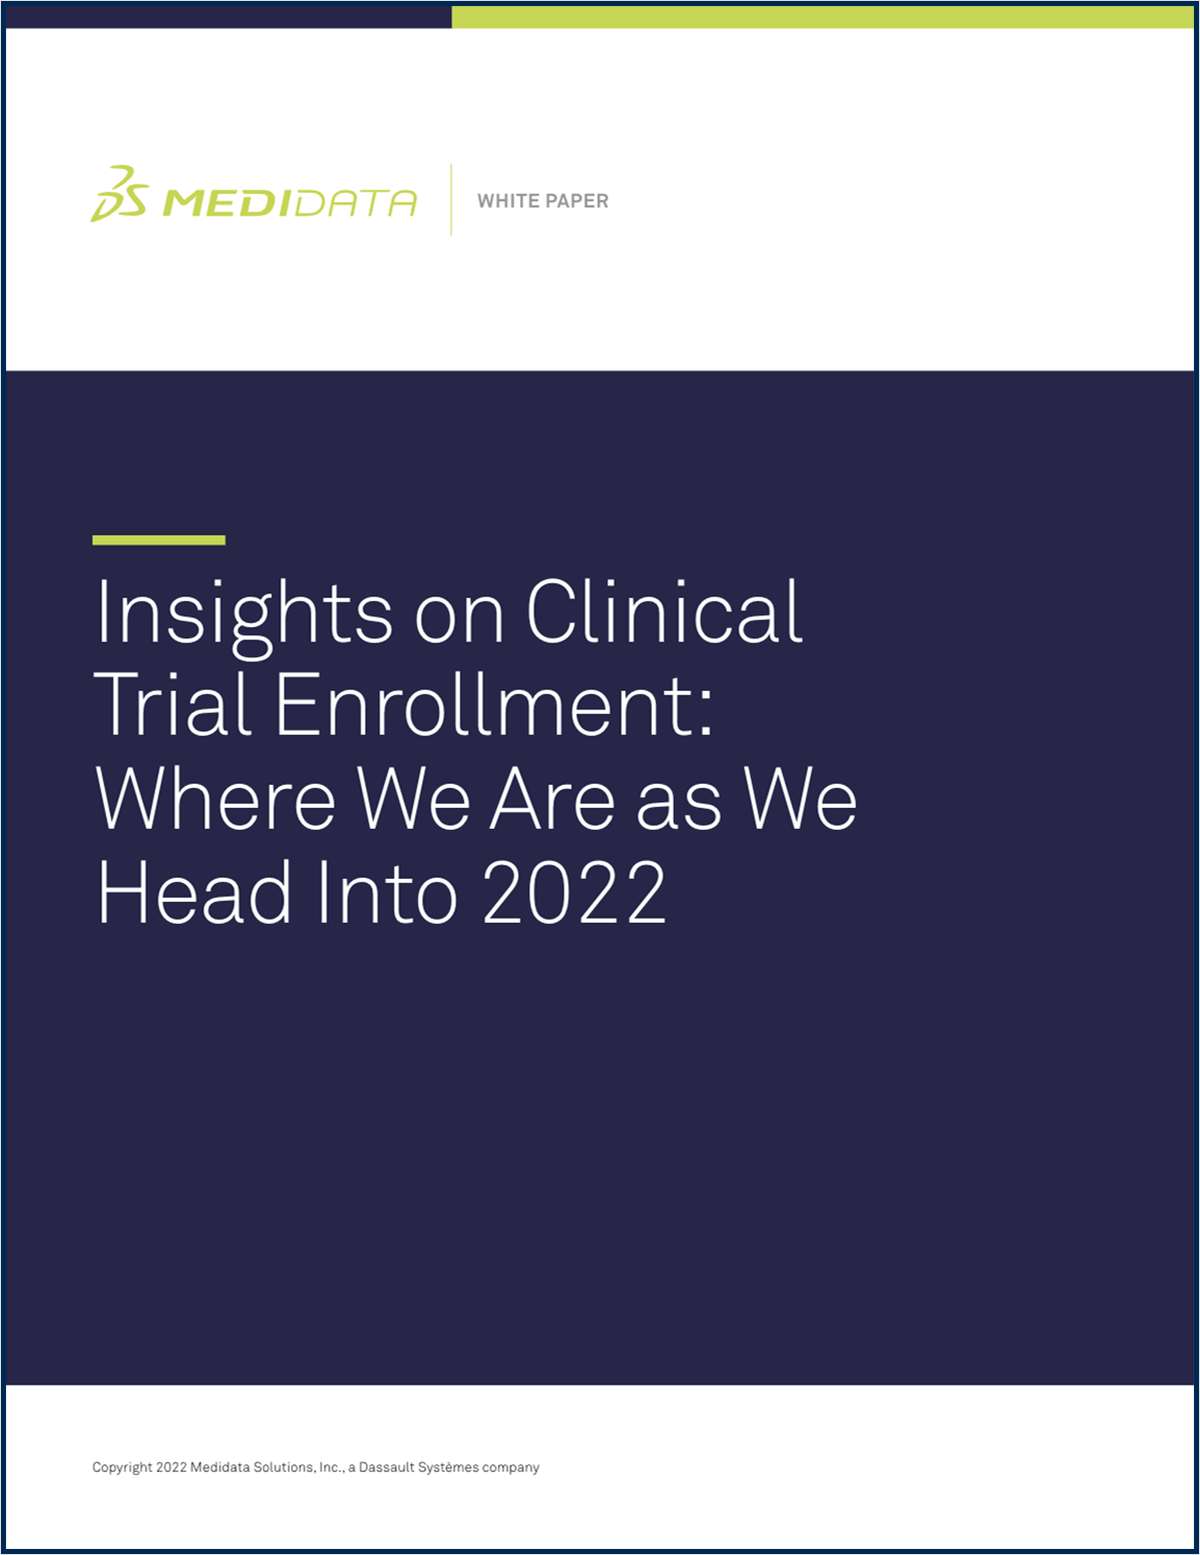 Insights on Clinical Trial Enrollment: Where we are as we head into 2022